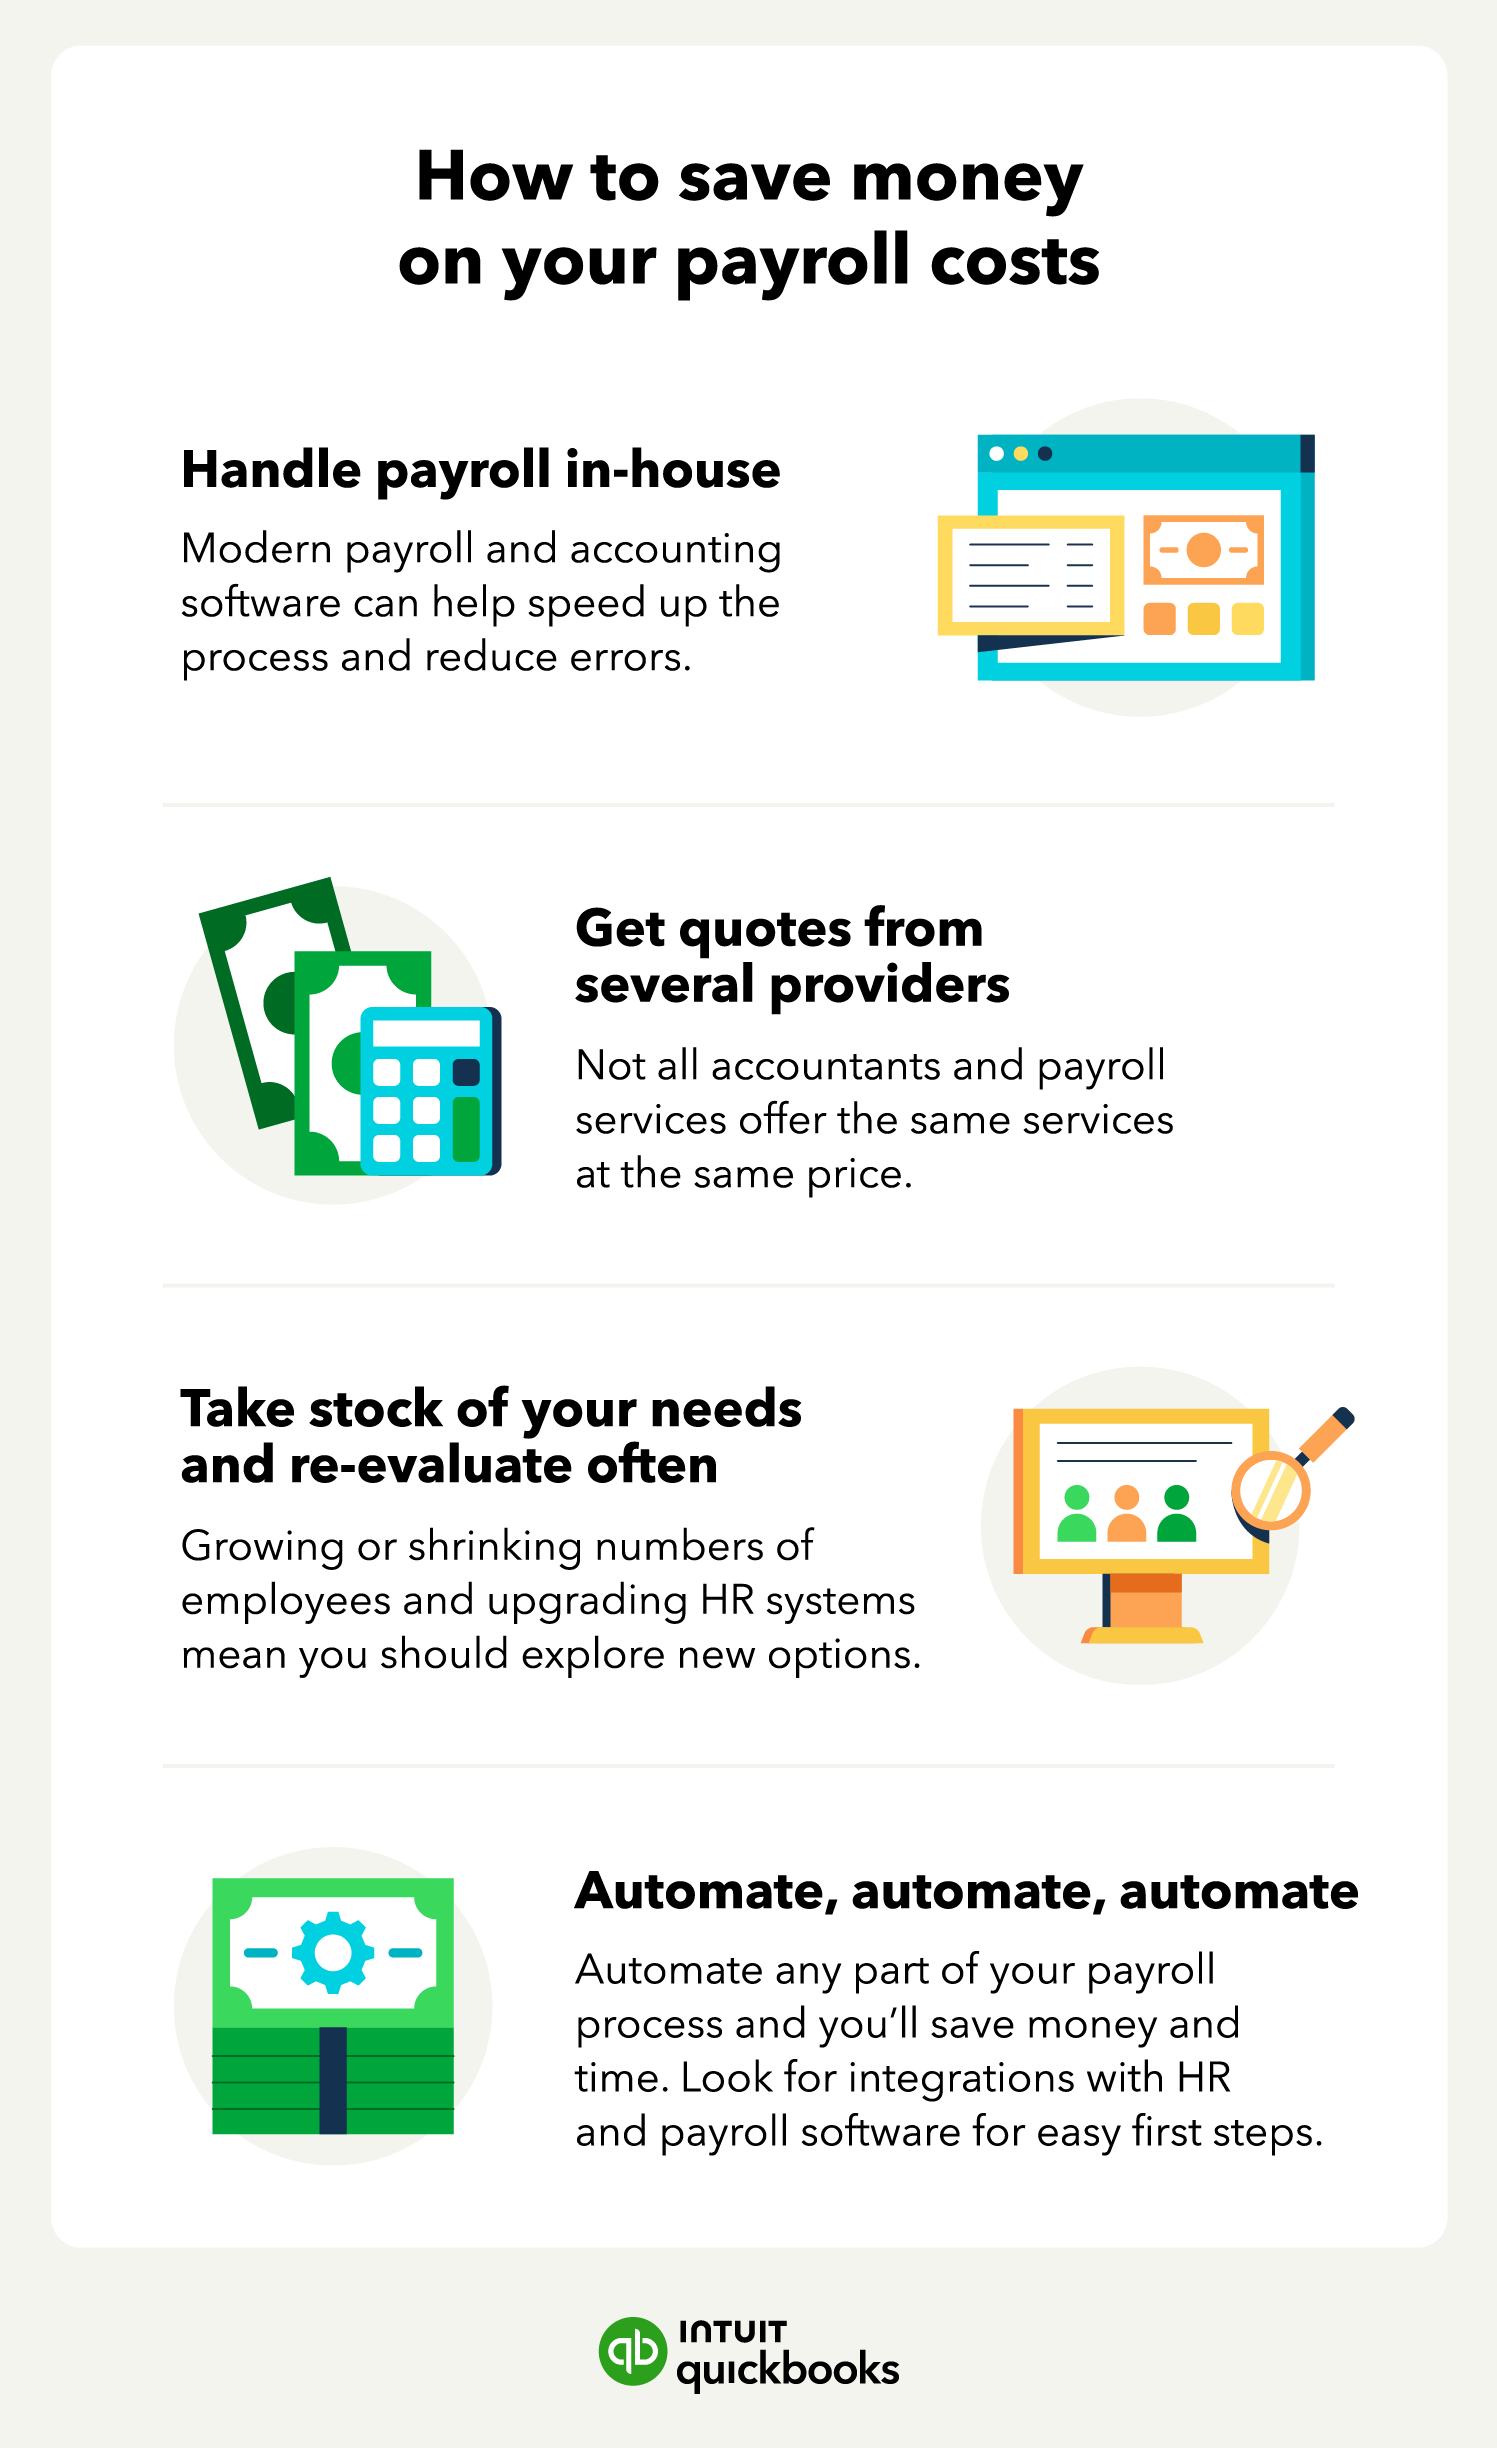 infographic about how to save money on payroll costs with tips about doing payroll in-house, getting quotes from providers, re-evaluating needs often, and automating payroll processes.